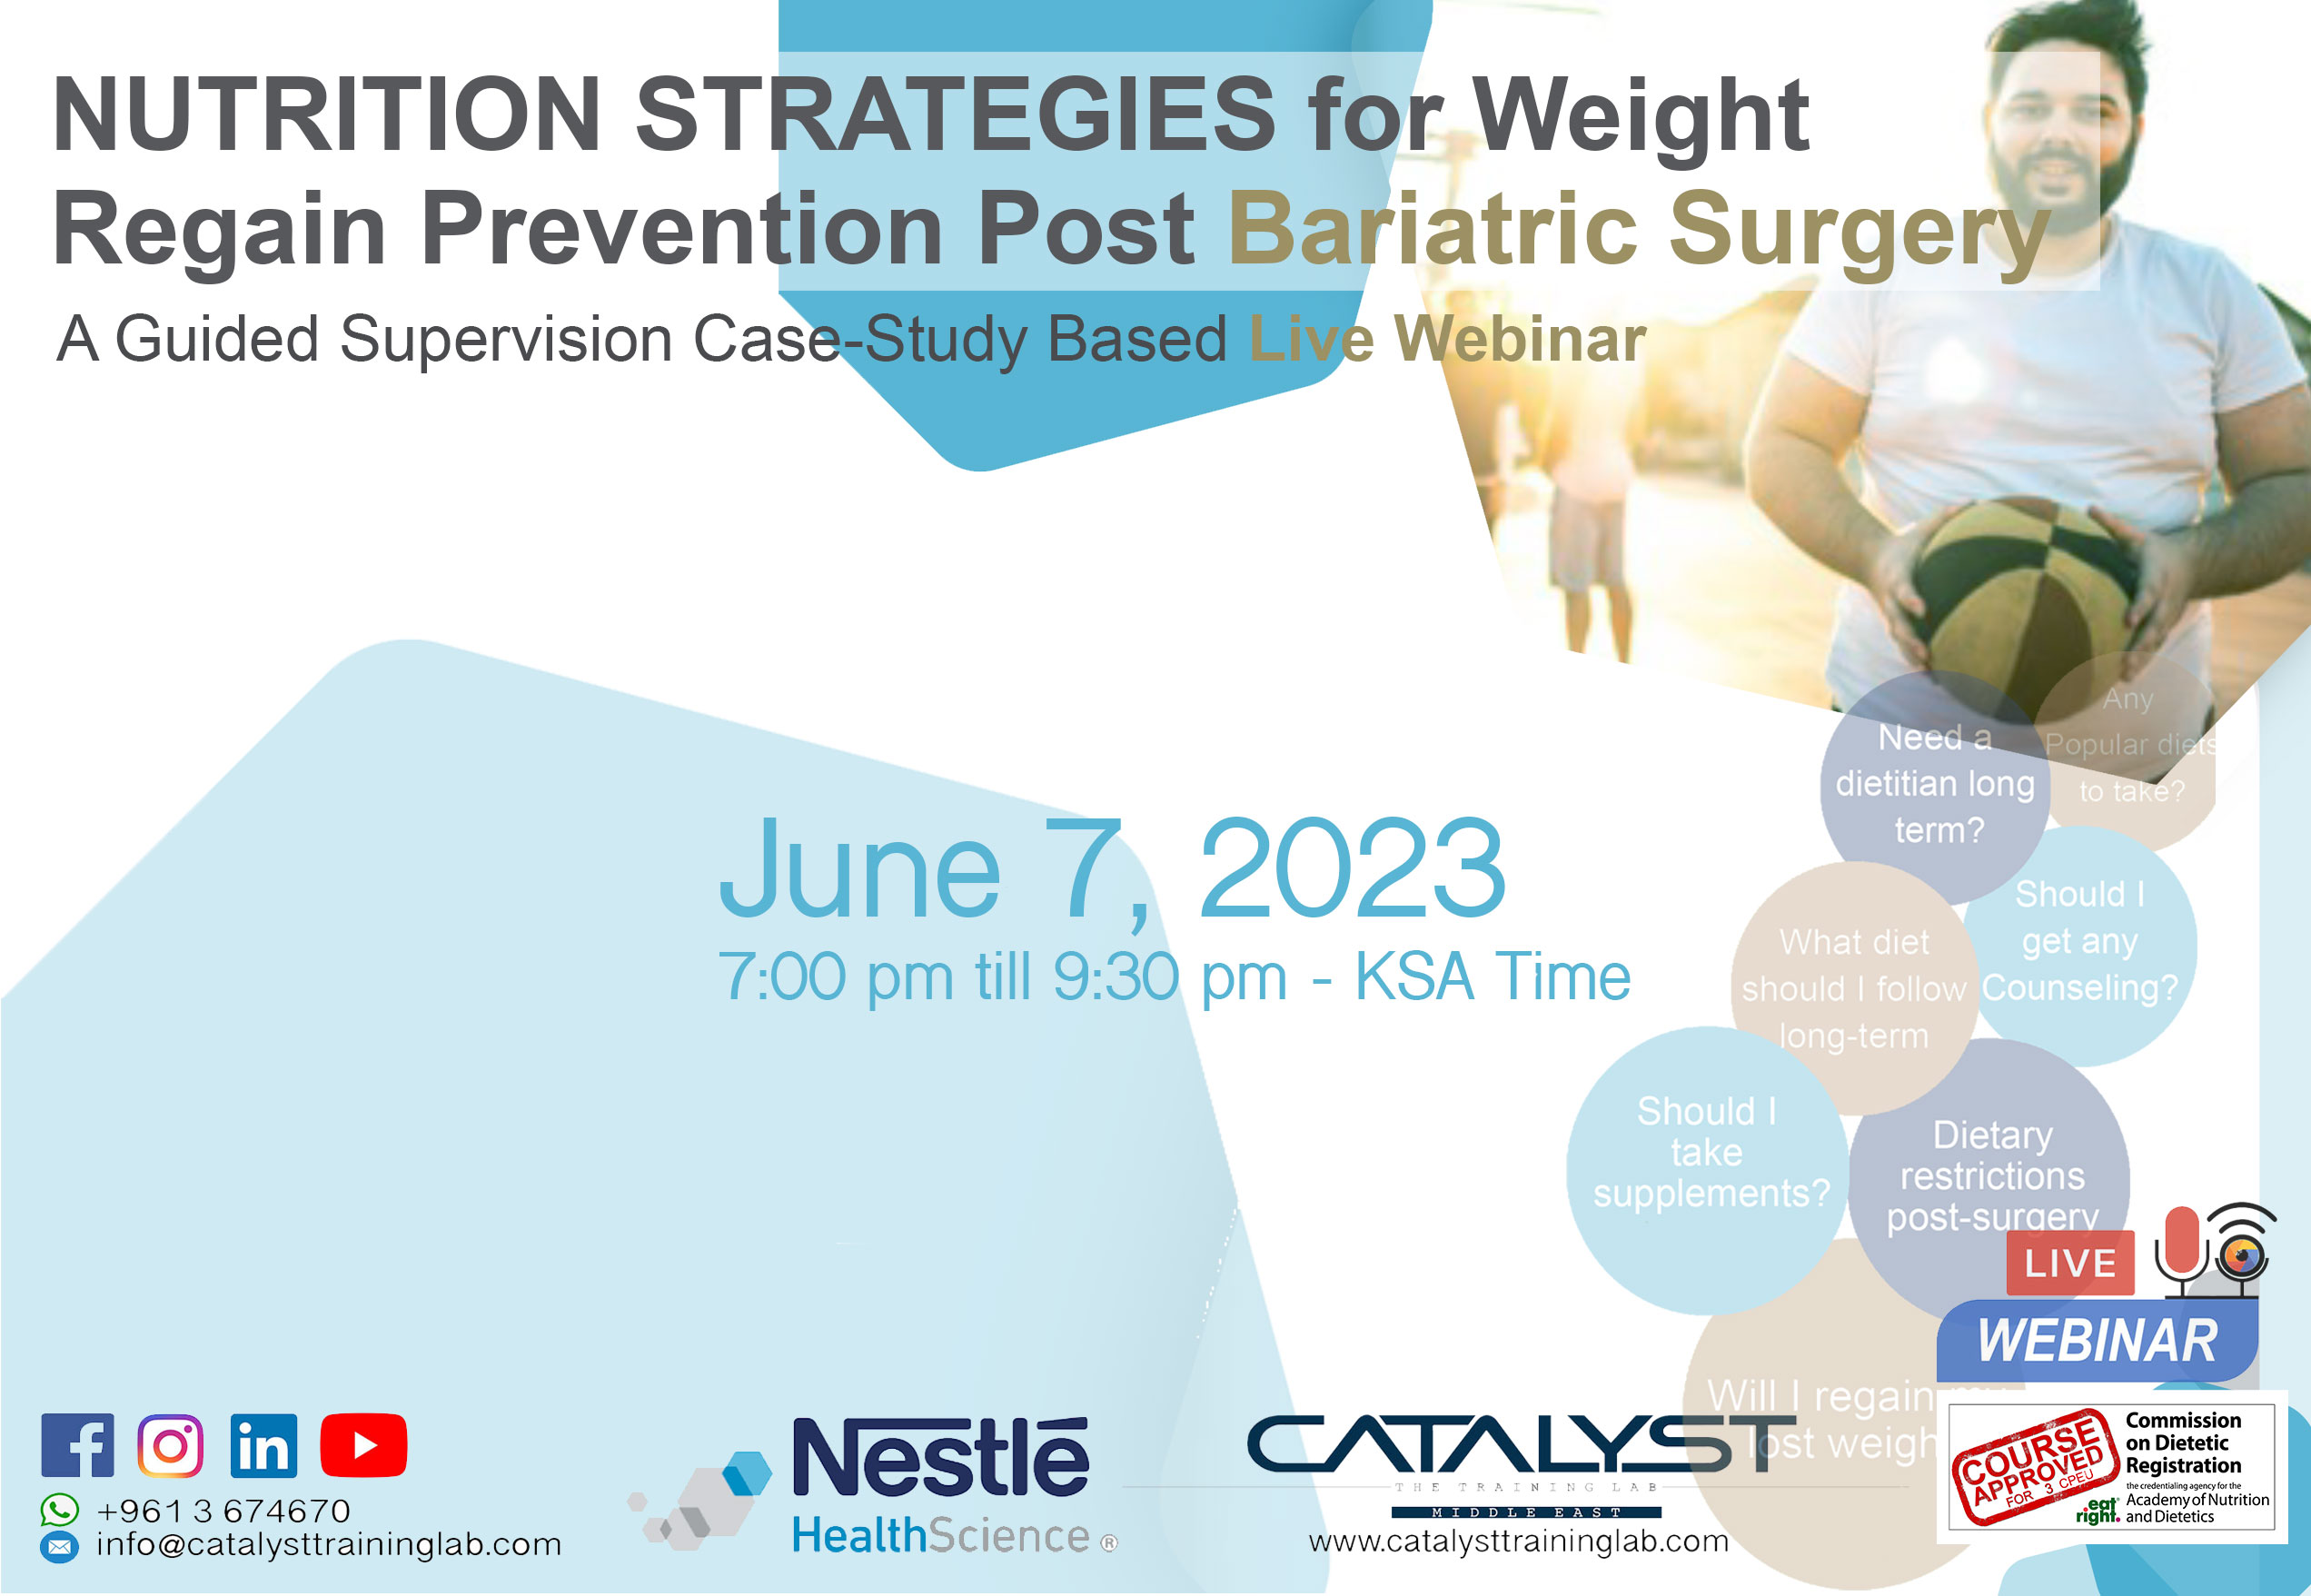 Nutrition Strategies for Weight Regain Prevention Post Bariatric Surgery